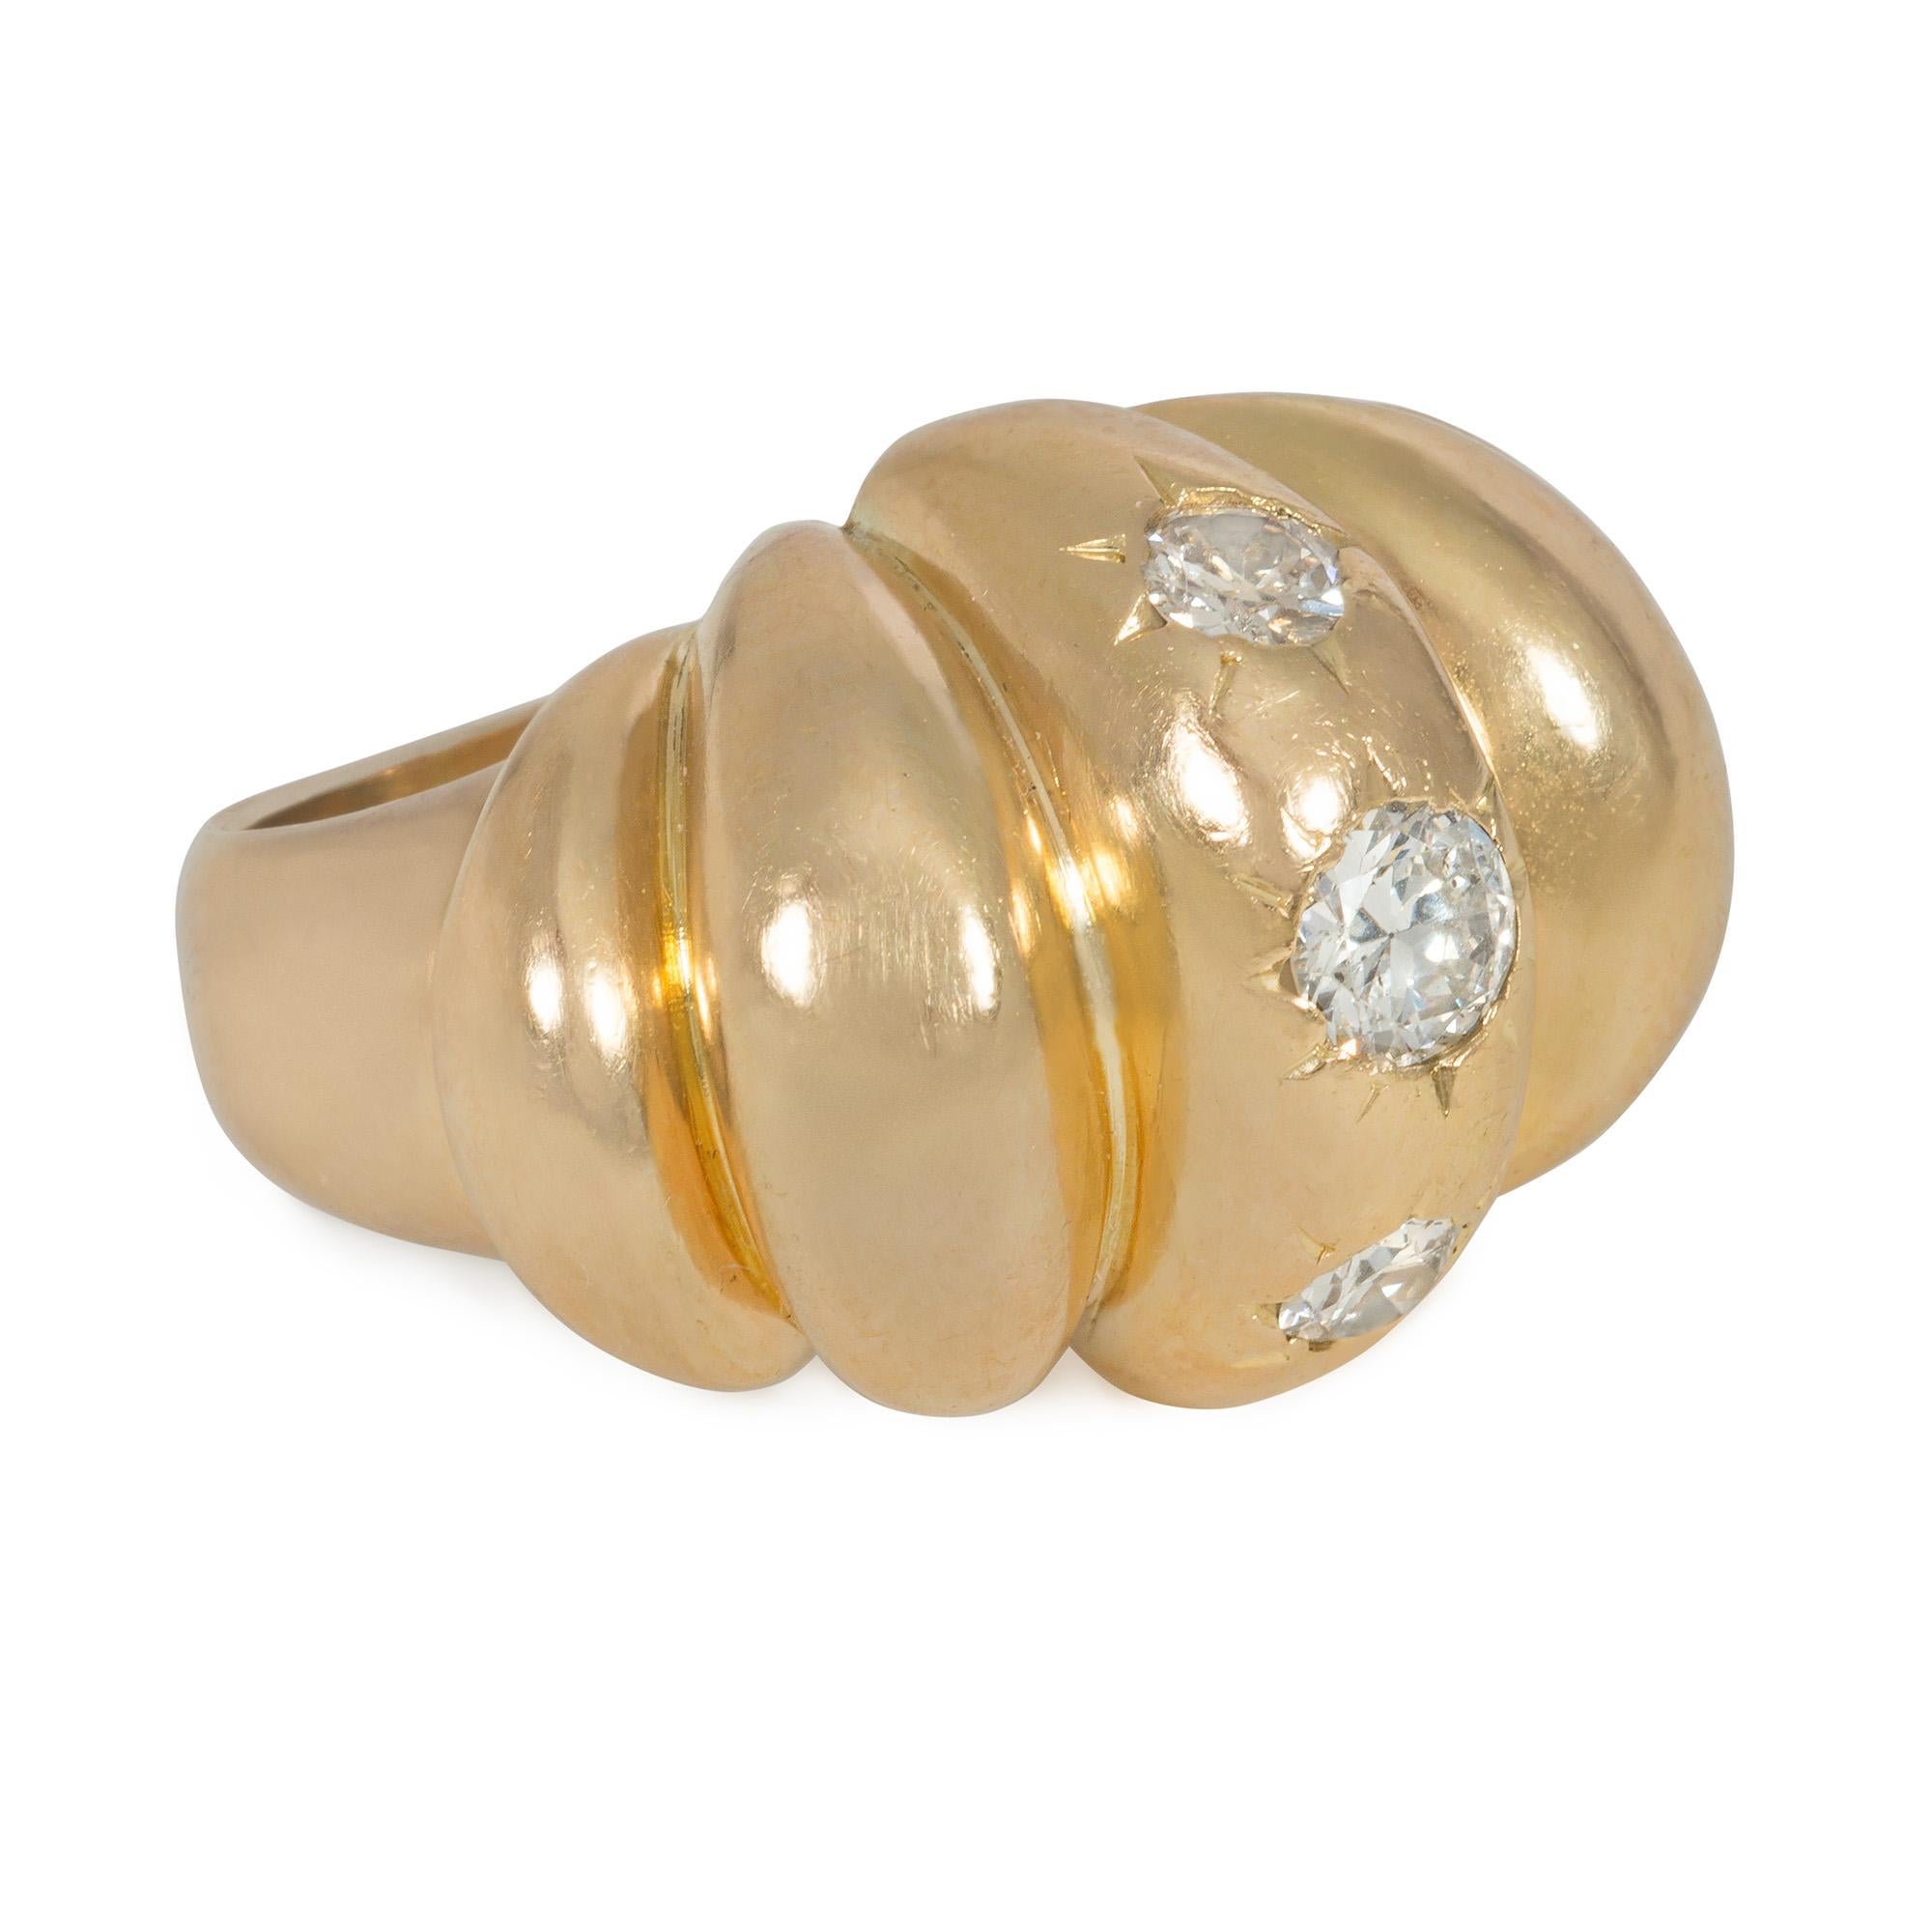 A Mid-Century gold and diamond bombé cocktail ring of lobed design, centered by three round brilliant-cut in-set diamonds, in 18k.  France.  Atw 0.75 ct.
Face-up north to south measurement: 0.75